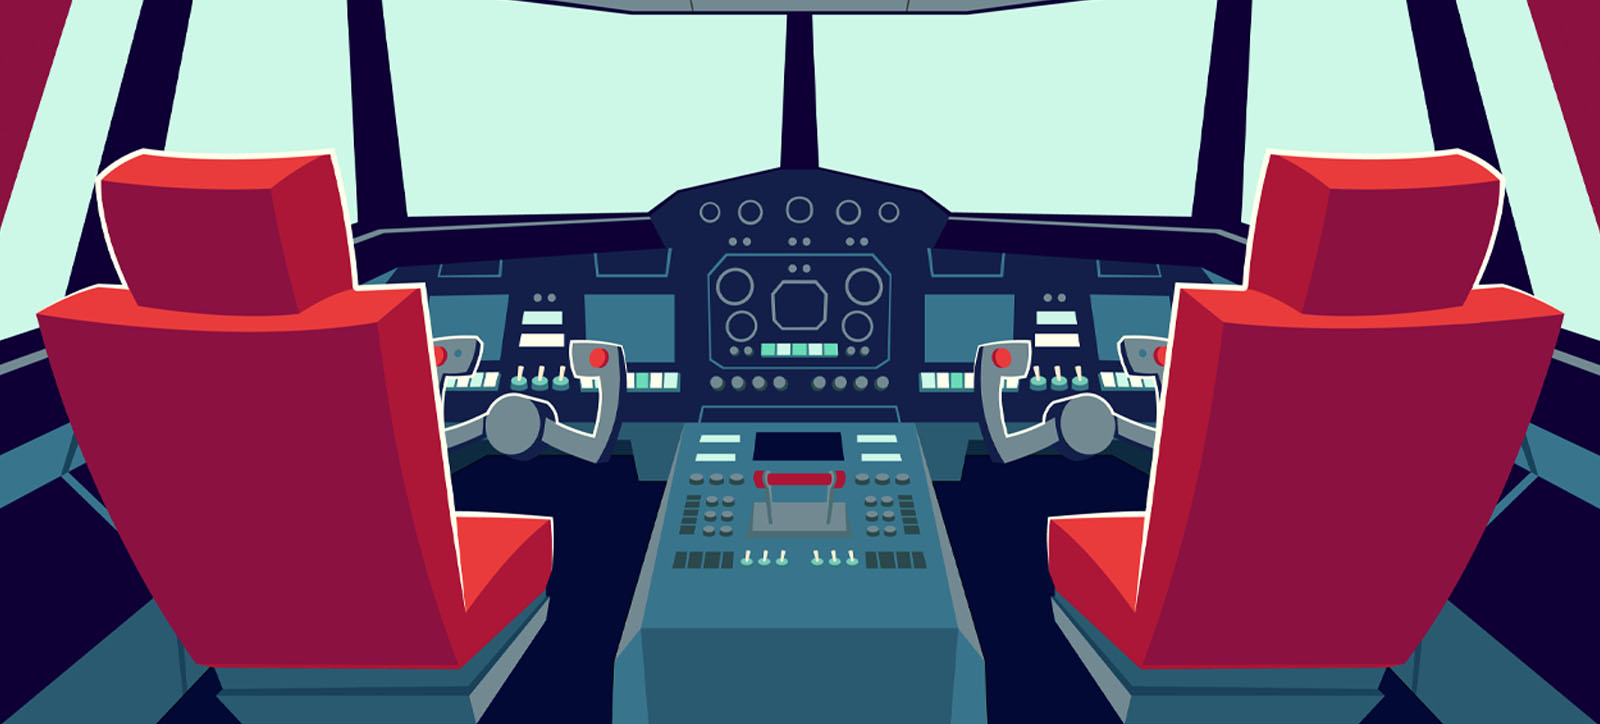 cockpit depicting the tools for open strategy